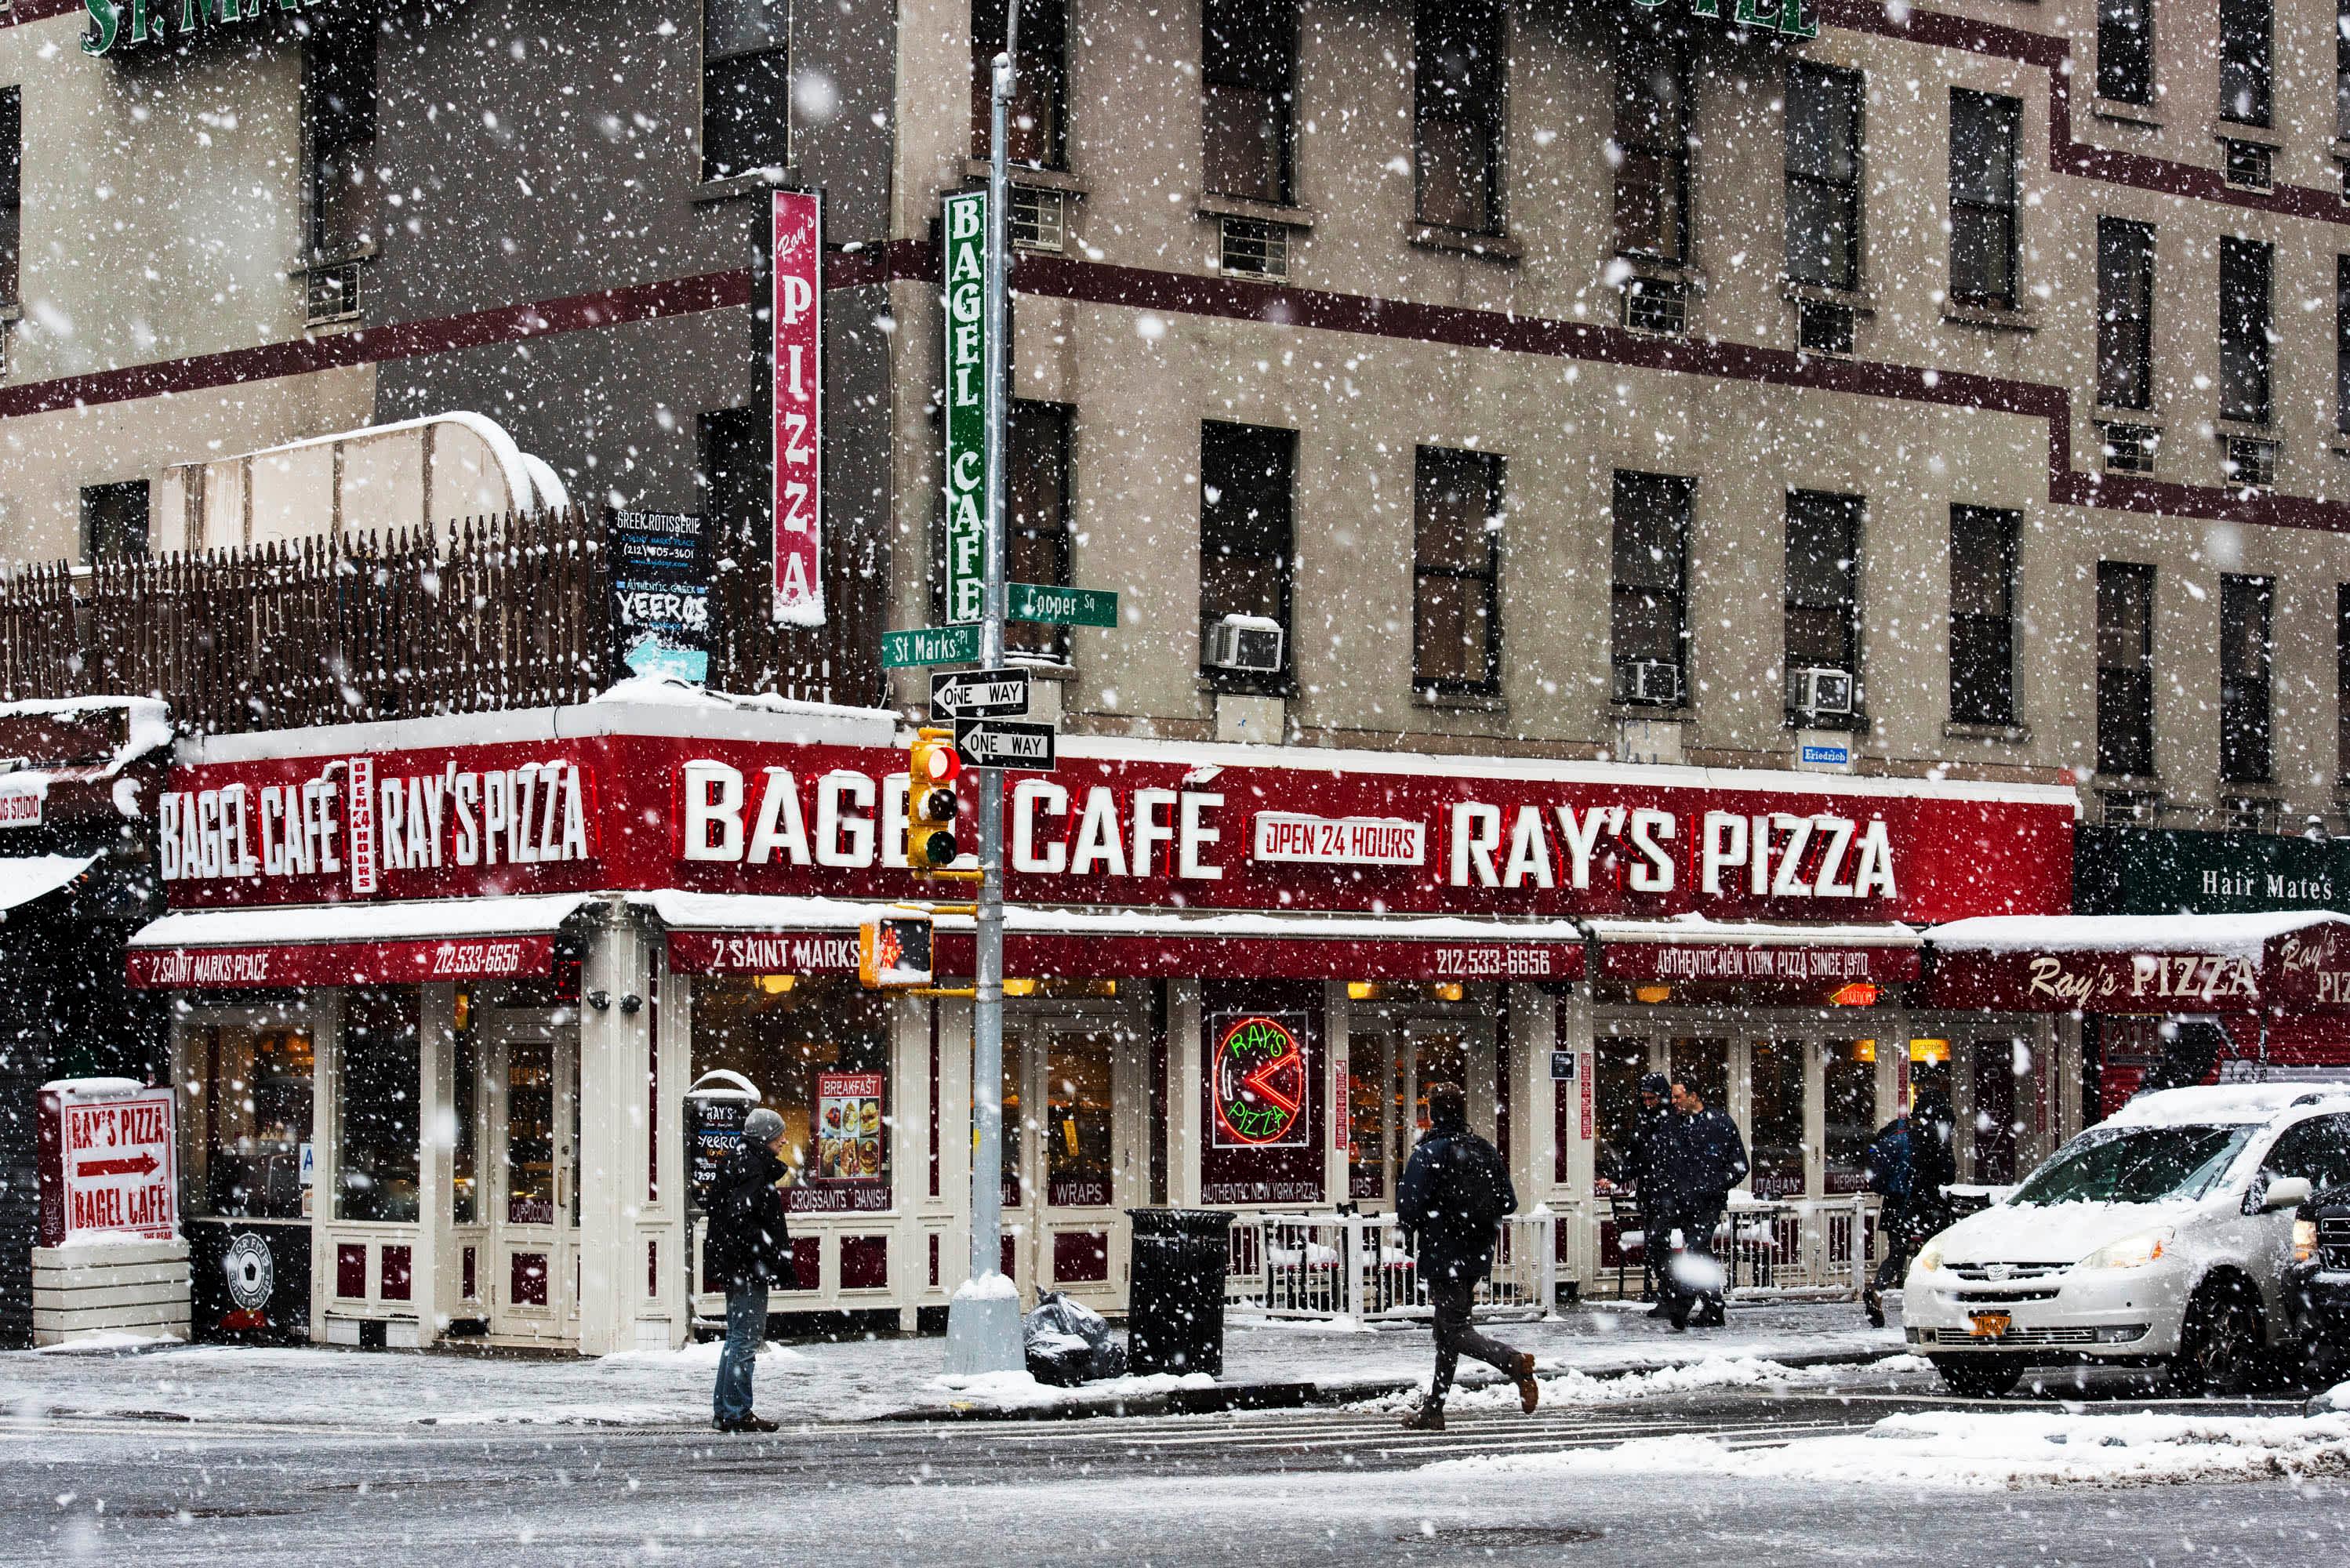 snow falling in front of Bagel Cafe in East Village, Manhattan